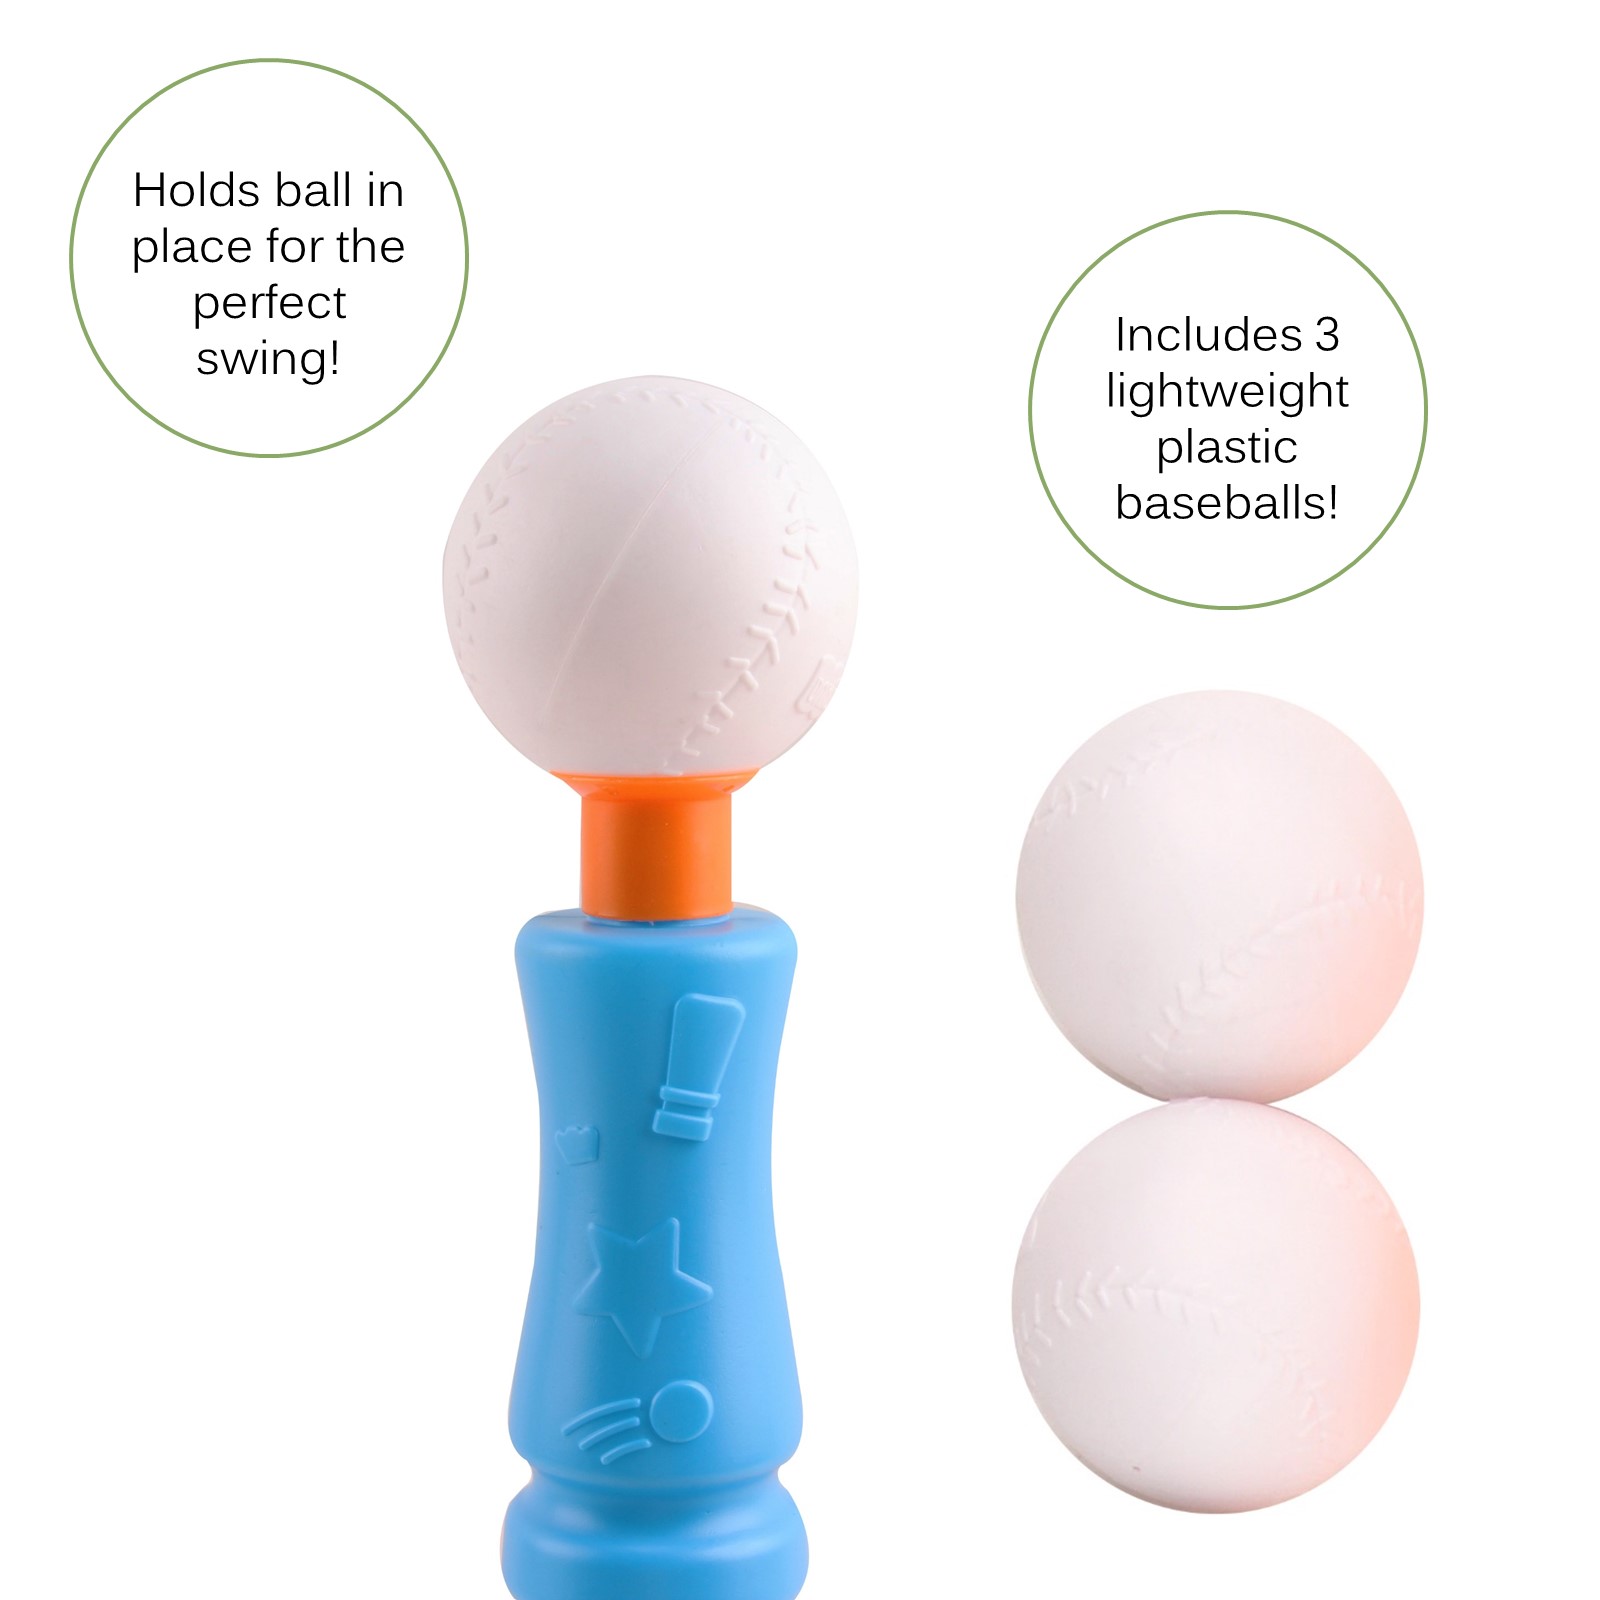 T-Ball Set For Toddlers And Kids Baseball Tee Game Practice Includes 1 Bat 2 Balls Adjustable T Height Adapts With Your Childs Growth Spurts Improves Batting Skills Perfect Gift for Children Boys Girls Sports Toys TN-71